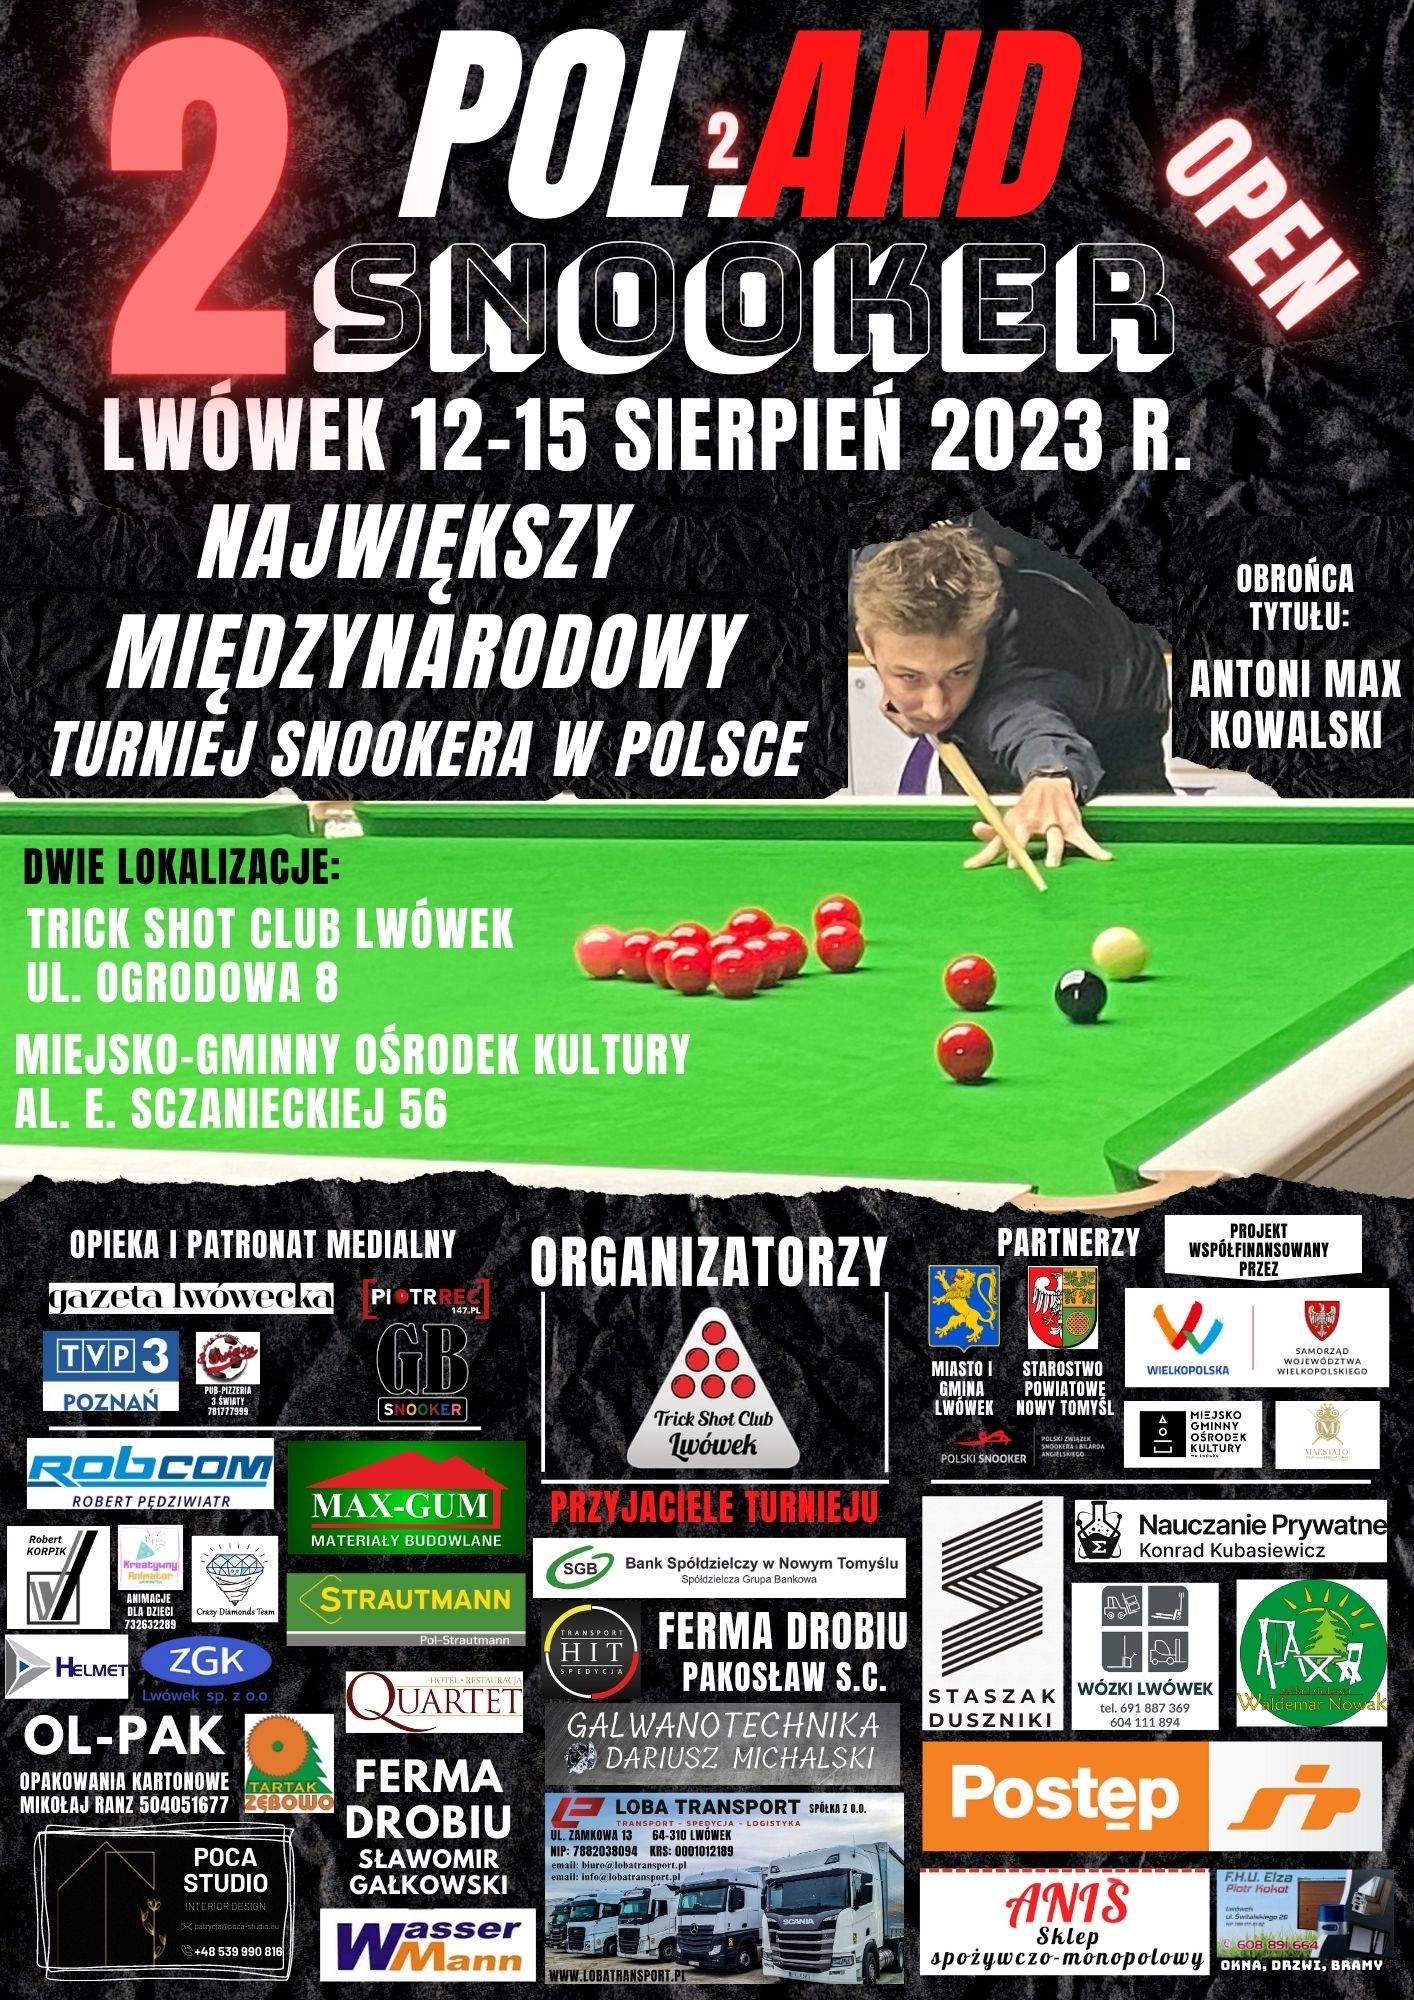 Plakat Pol.And Snooker 2023